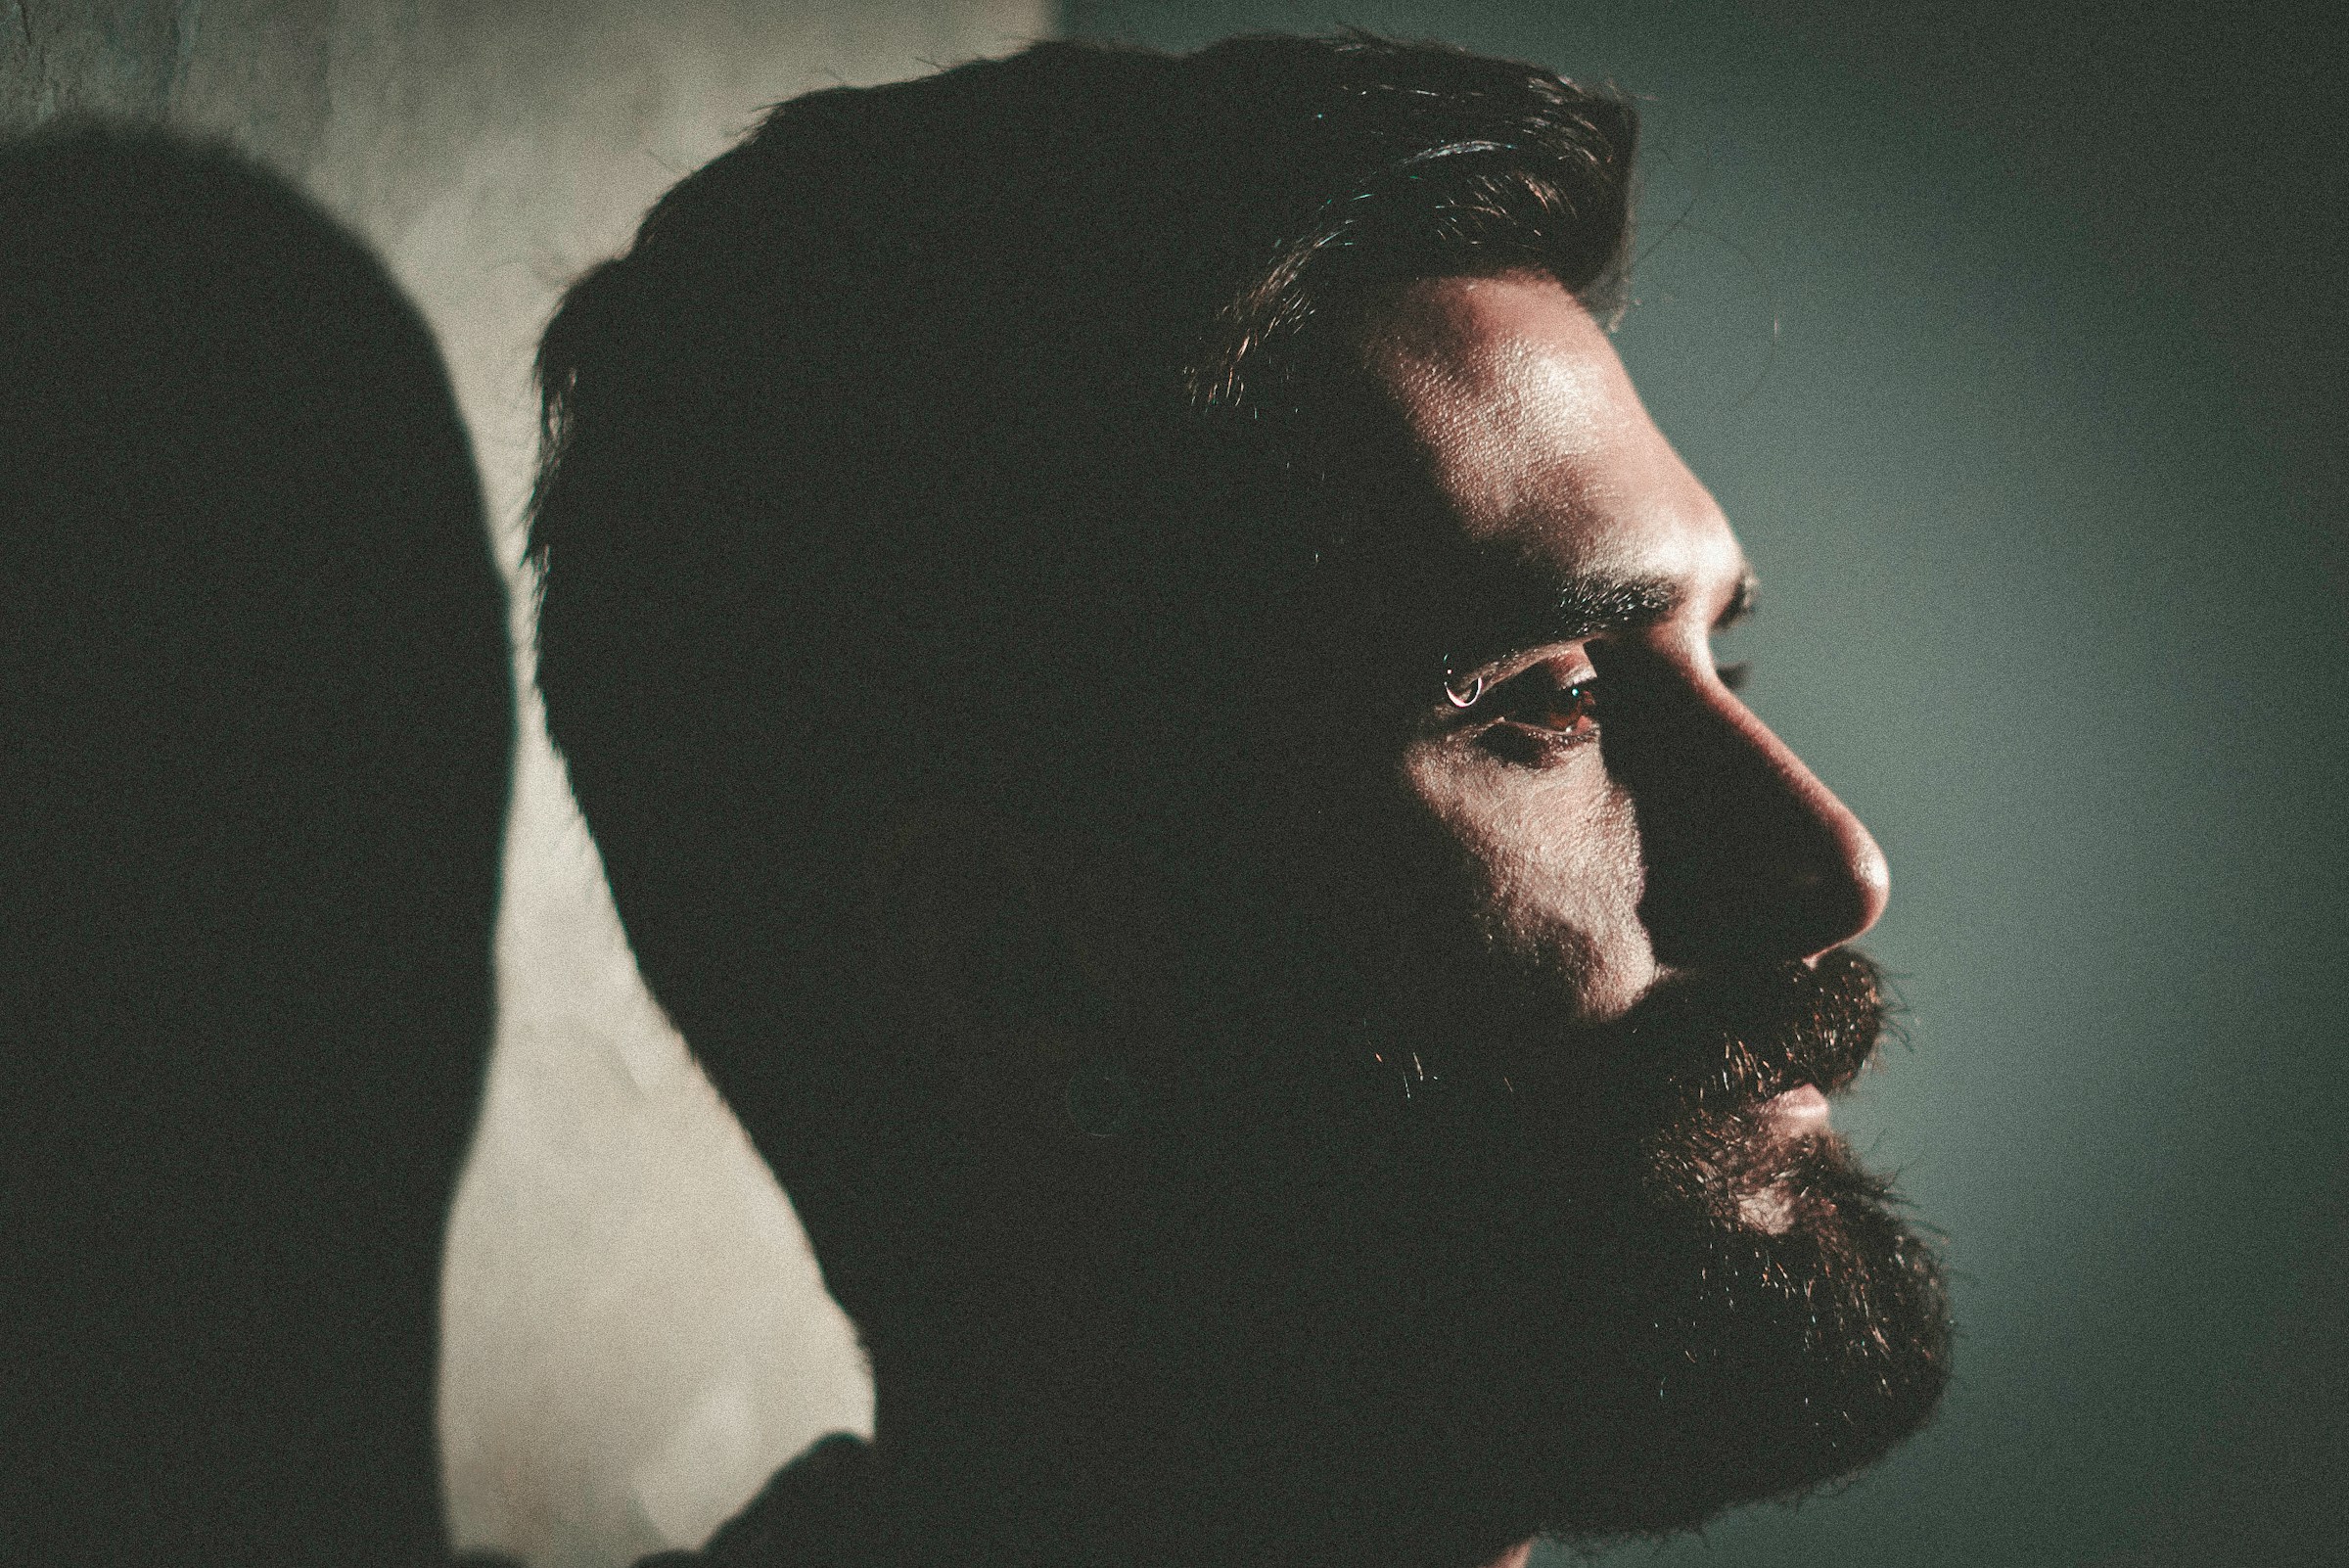 A man's face in profile | Source: Pexels